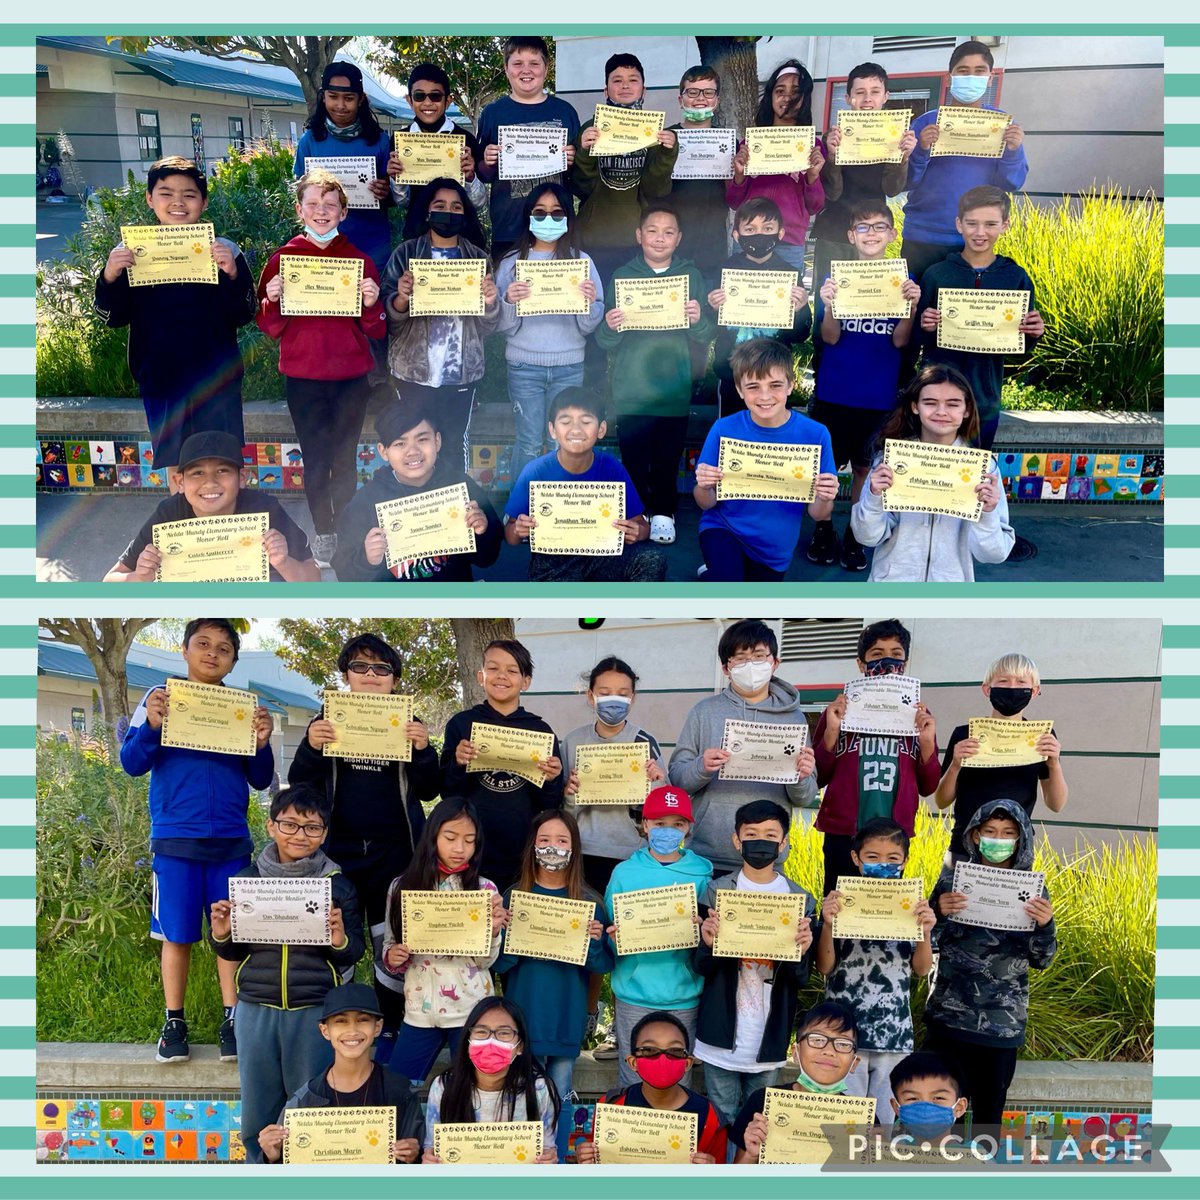 Here are the 2nd trimester Honor Roll & Honorable Mention recipients for 5th grade! Congratulations to students from Mrs. Beasley, Ms. Mascetti, Ms. Choy & Mrs. Weisz’s classes! 🎉 #TimberwolfProud